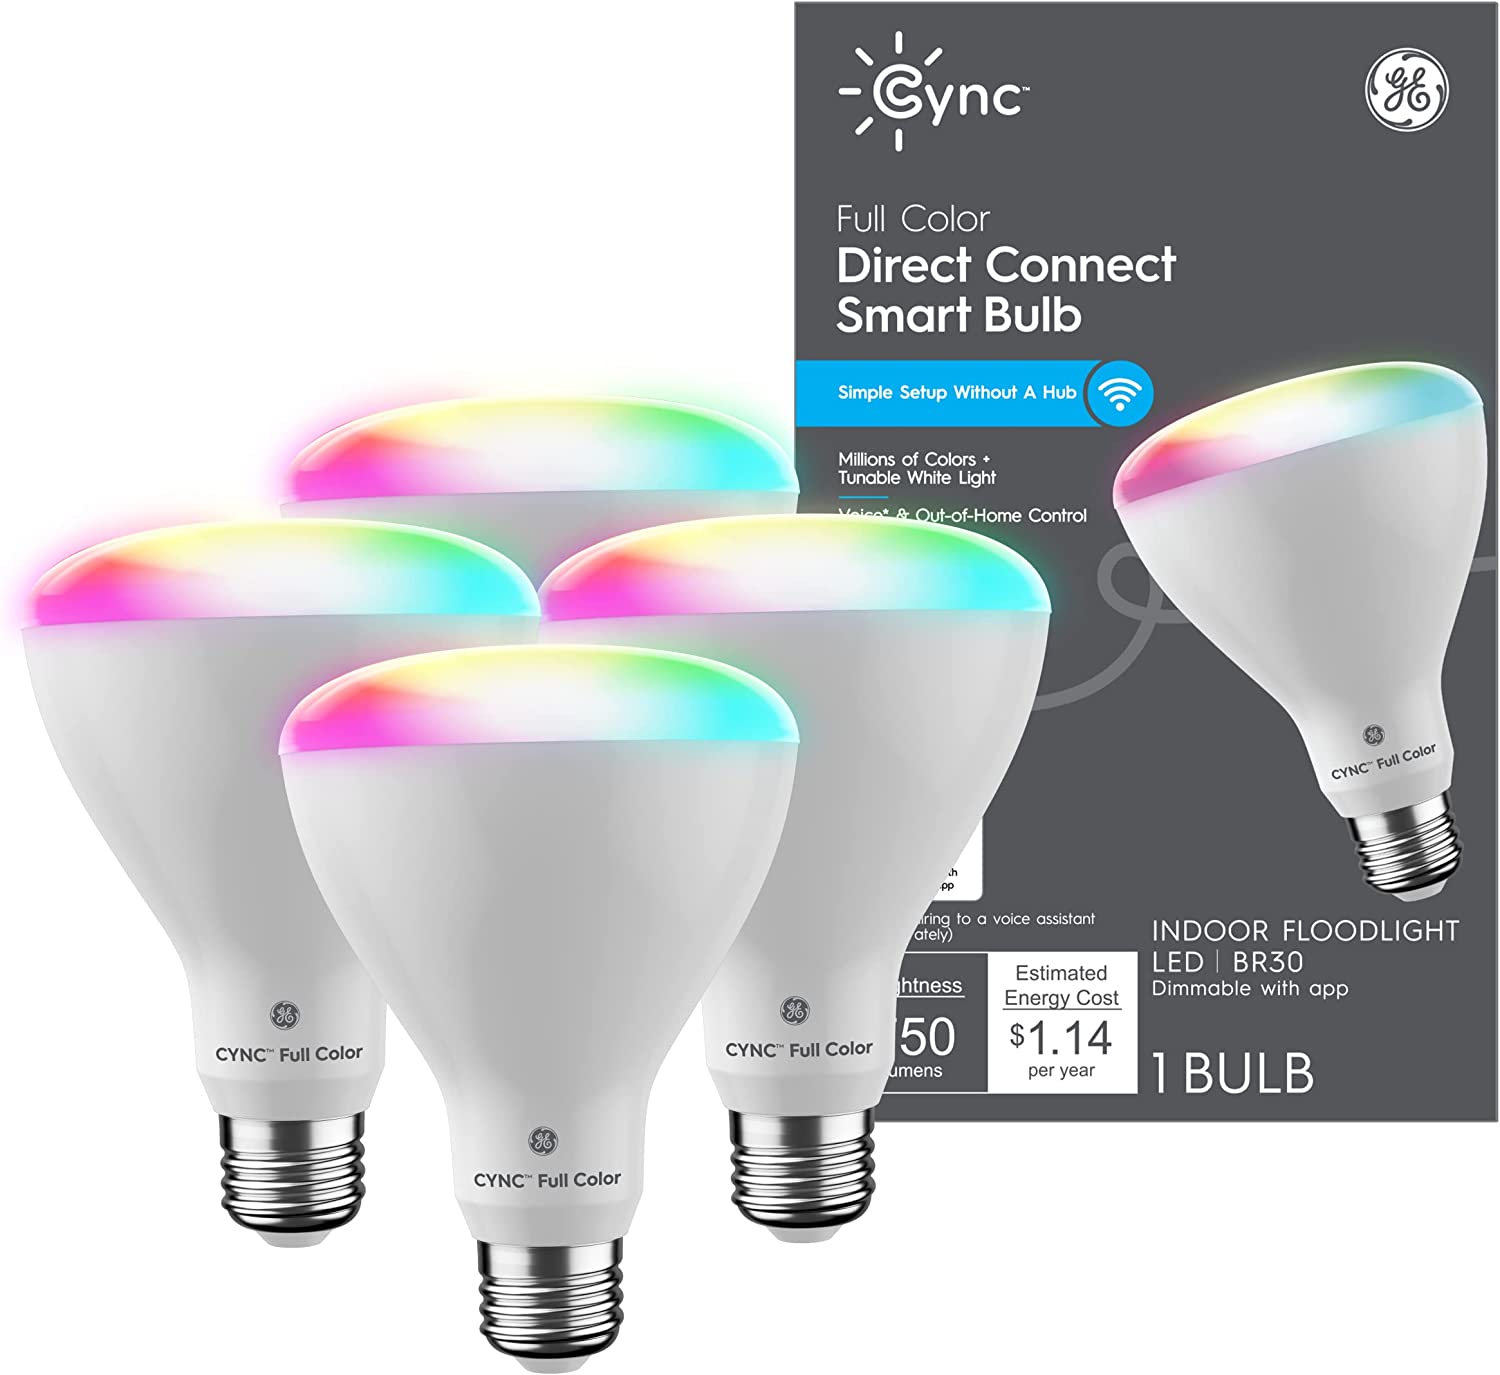 GE Lighting CYNC Smart LED Light Bulbs, Color Changing Lights, Bluetooth and Wi-Fi Lights, Compatible with Alexa and Google Home, BR30 Indoor Floodlight Bulbs (4 Pack),White